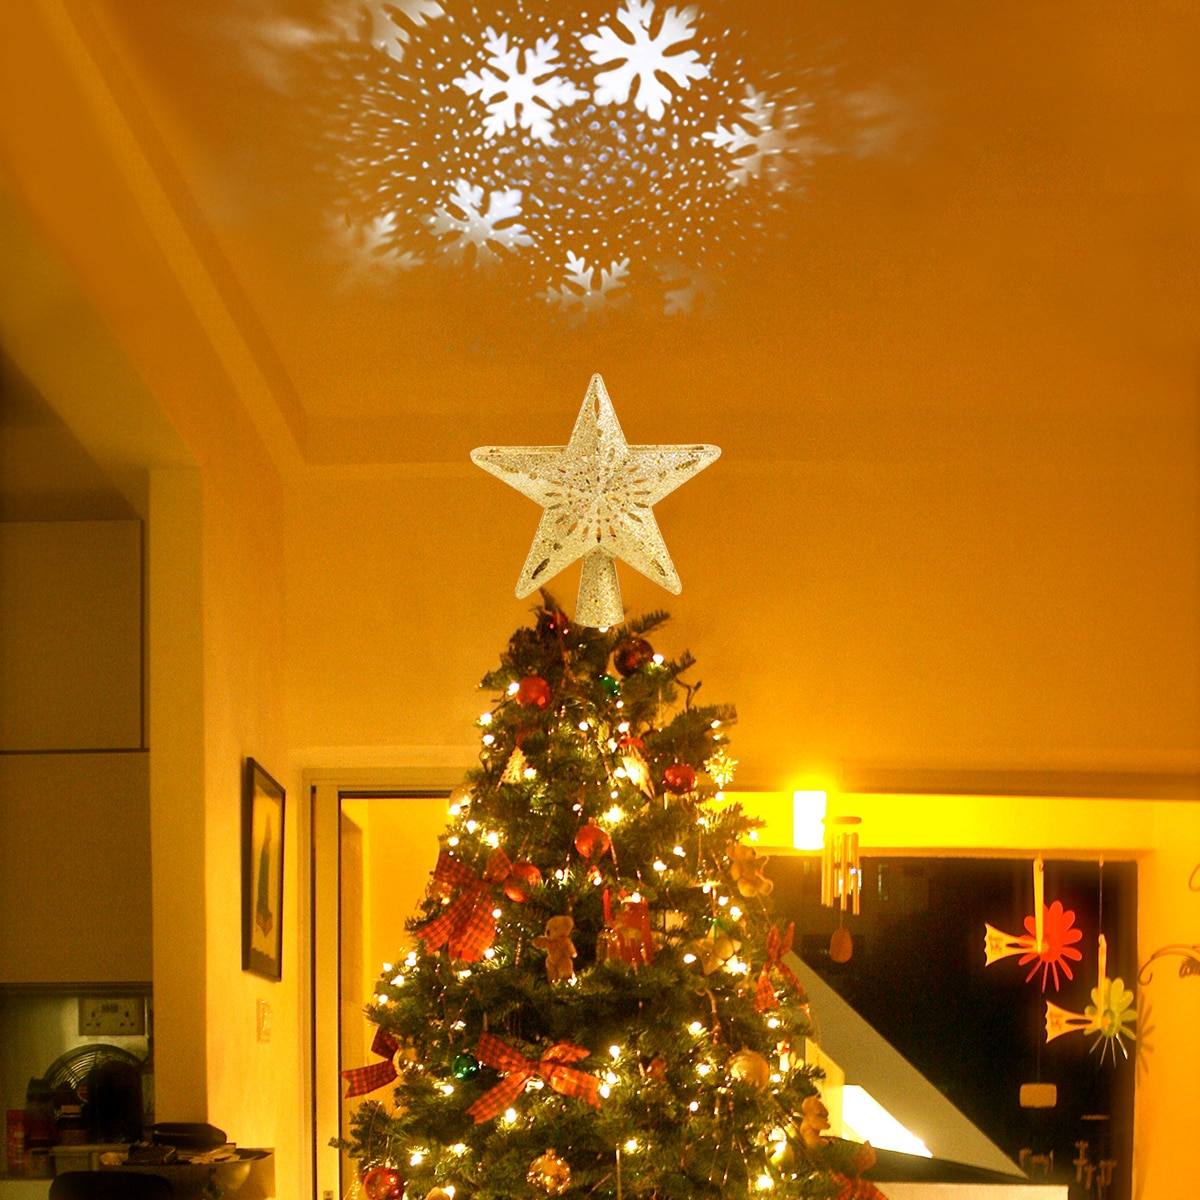 Golden Star Christmas Tree Topper With Built In Rotating Snowflake  Projection Light Xmas Tree Decor Navidad 2020 New Year 2021 From Warmmove,  .23 | DHgate.Com